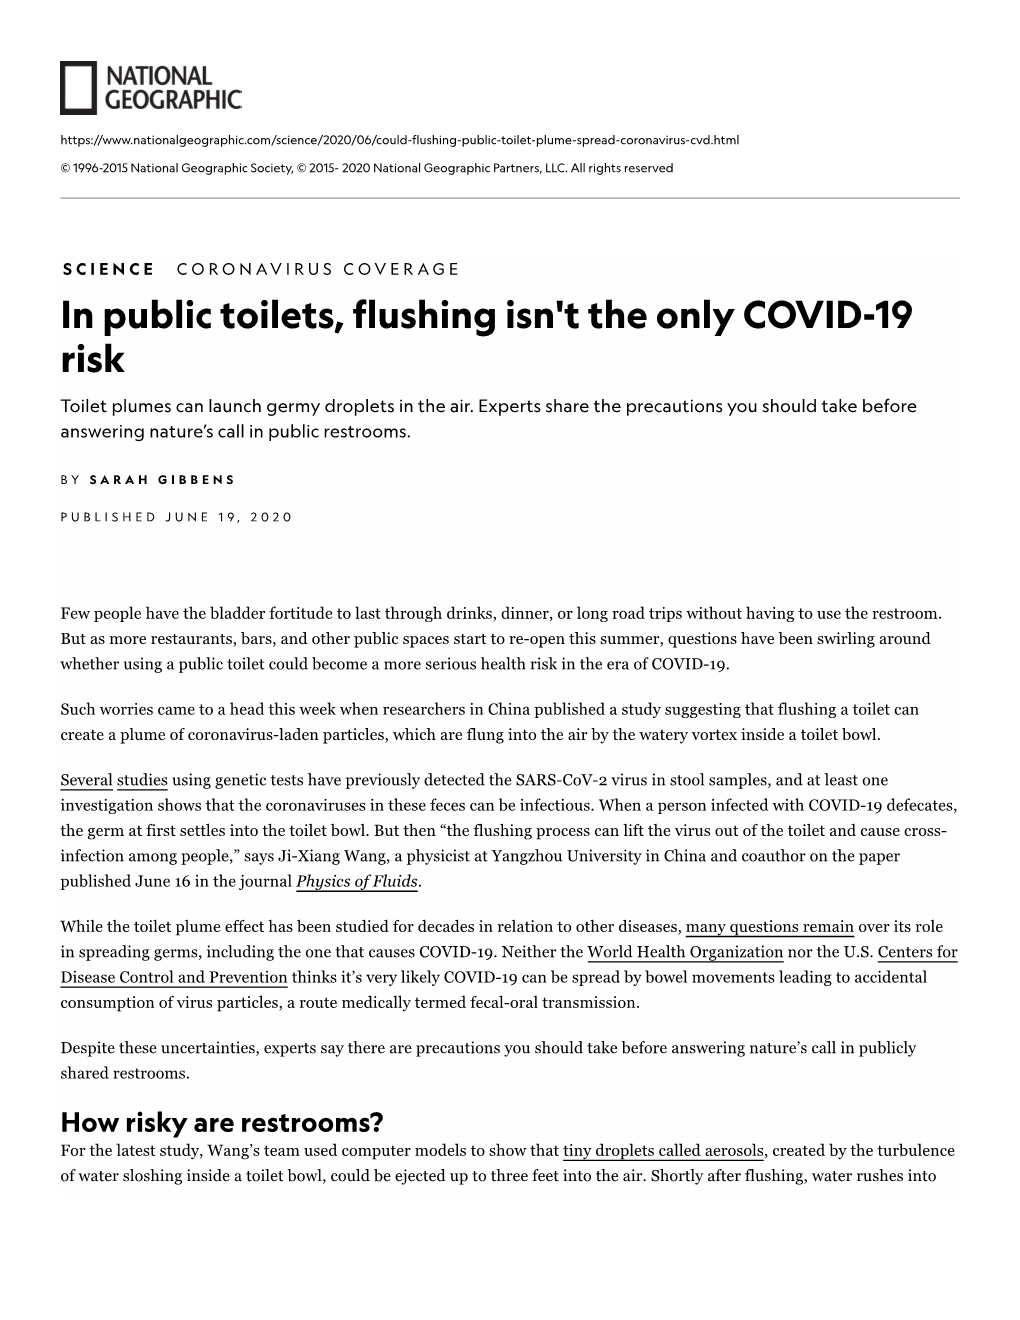 In Public Toilets, Flushing Isn't the Only COVID-19 Risk